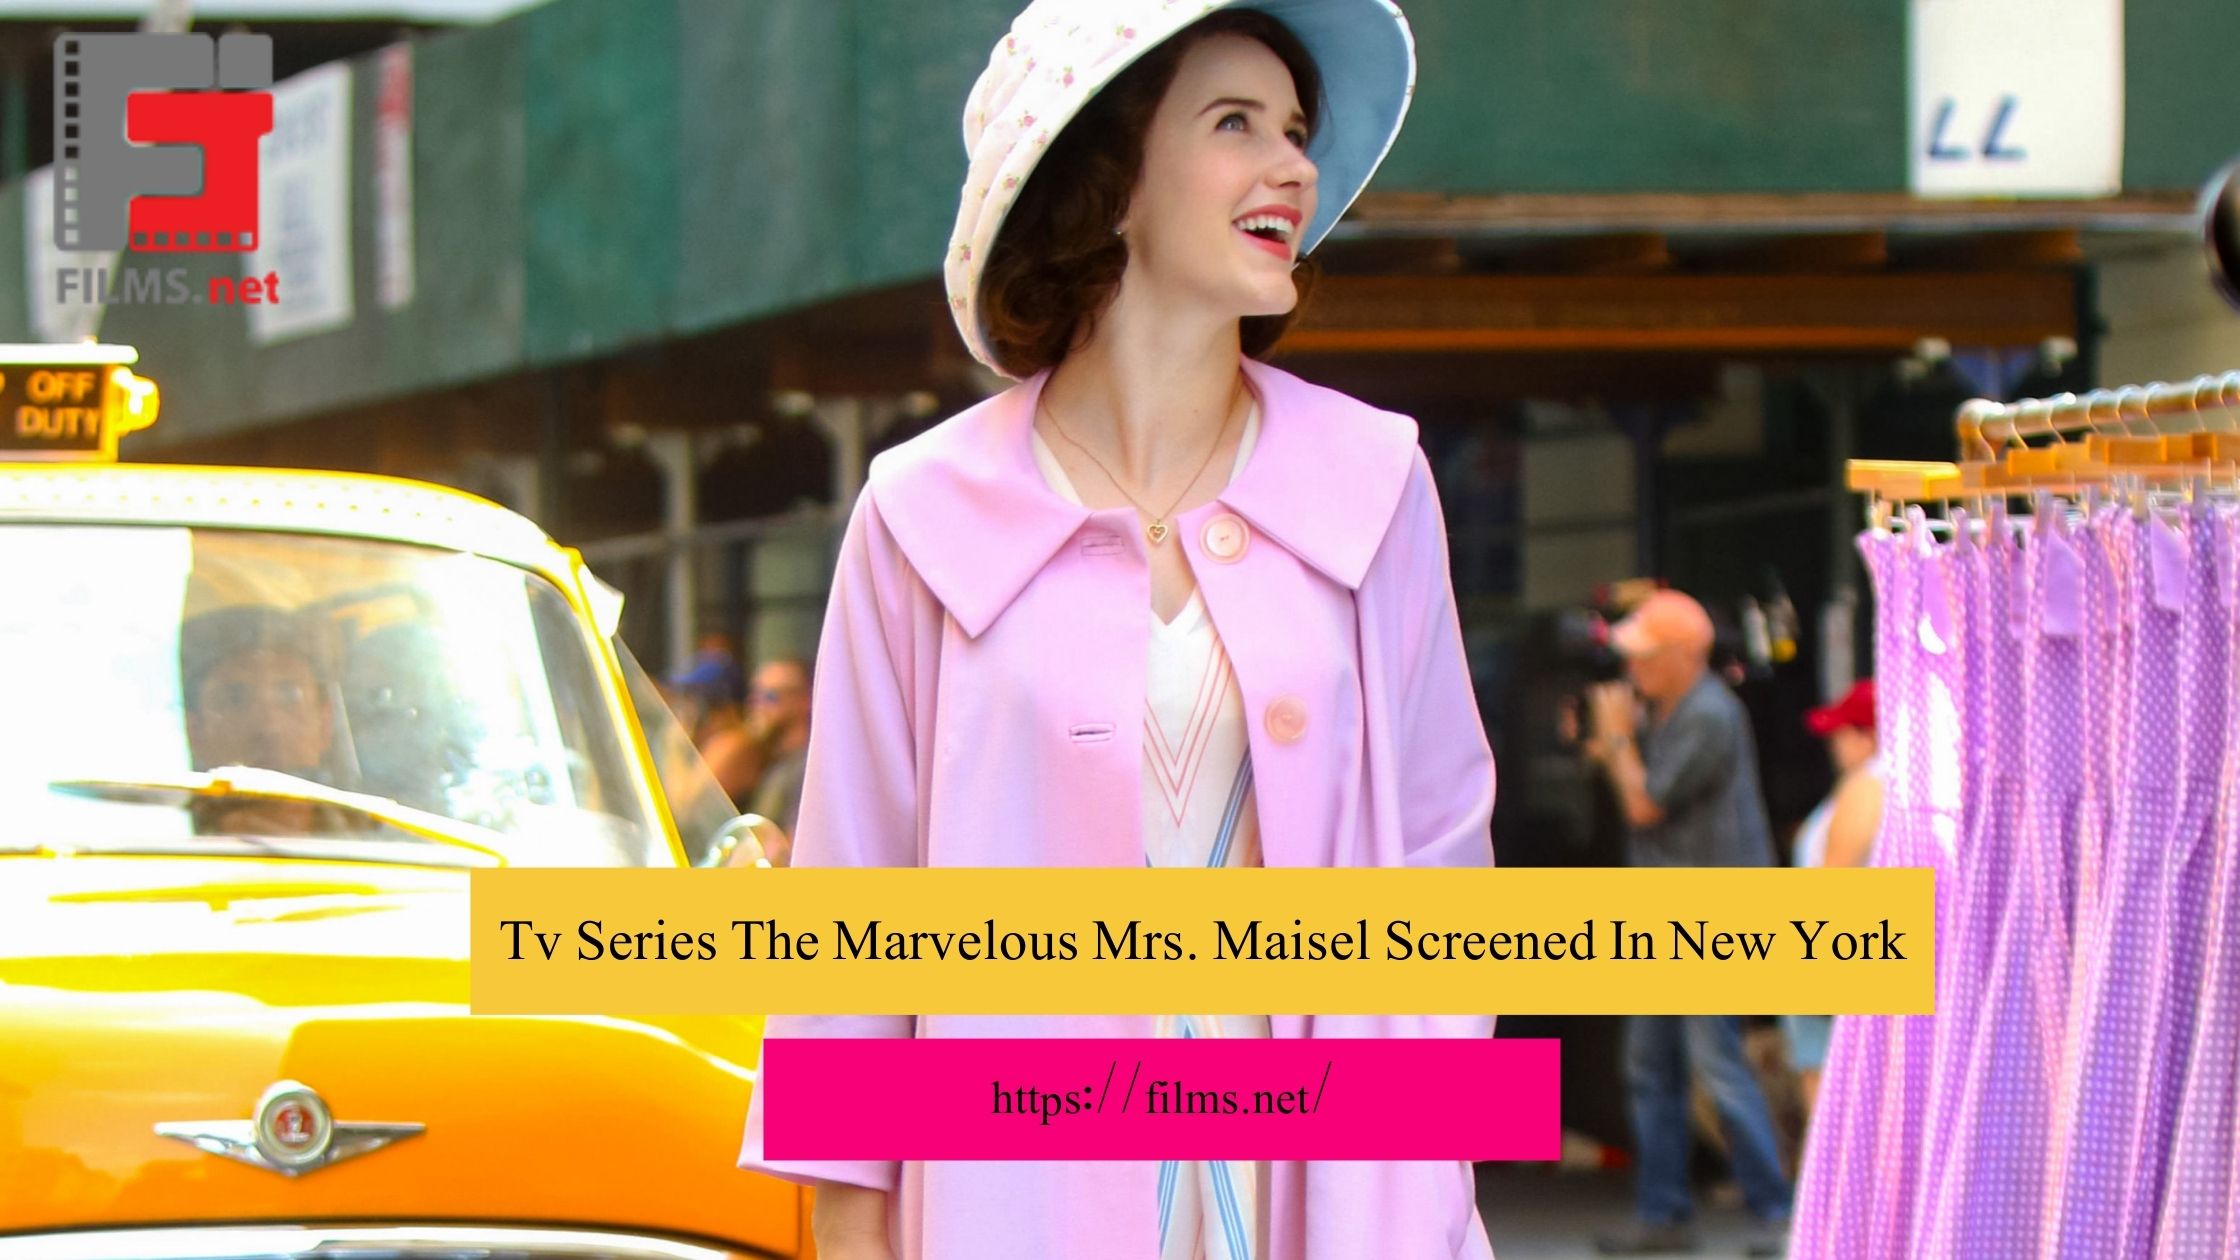 Tv Series The Marvelous Mrs. Maisel Screened In New York, Full Guide Of Episodes & Premiere 